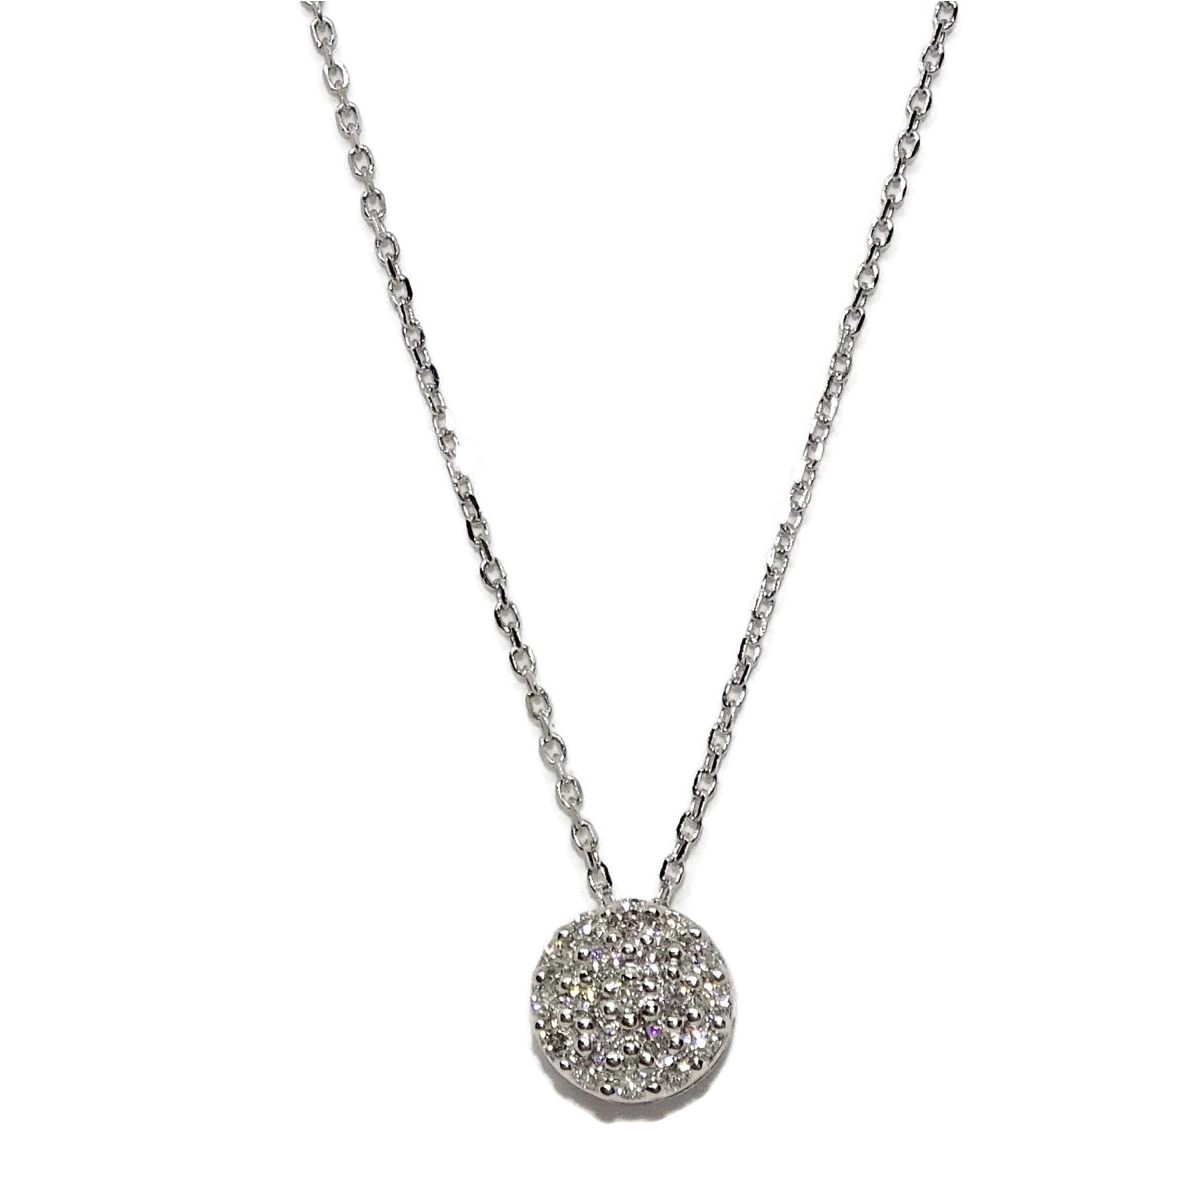 CL�SICO PENDANT FOR WOMAN IN 18K WHITE GOLD WITH 0.15 CTS OF DIAMONDS, 7MM NEVER SAY NEVER